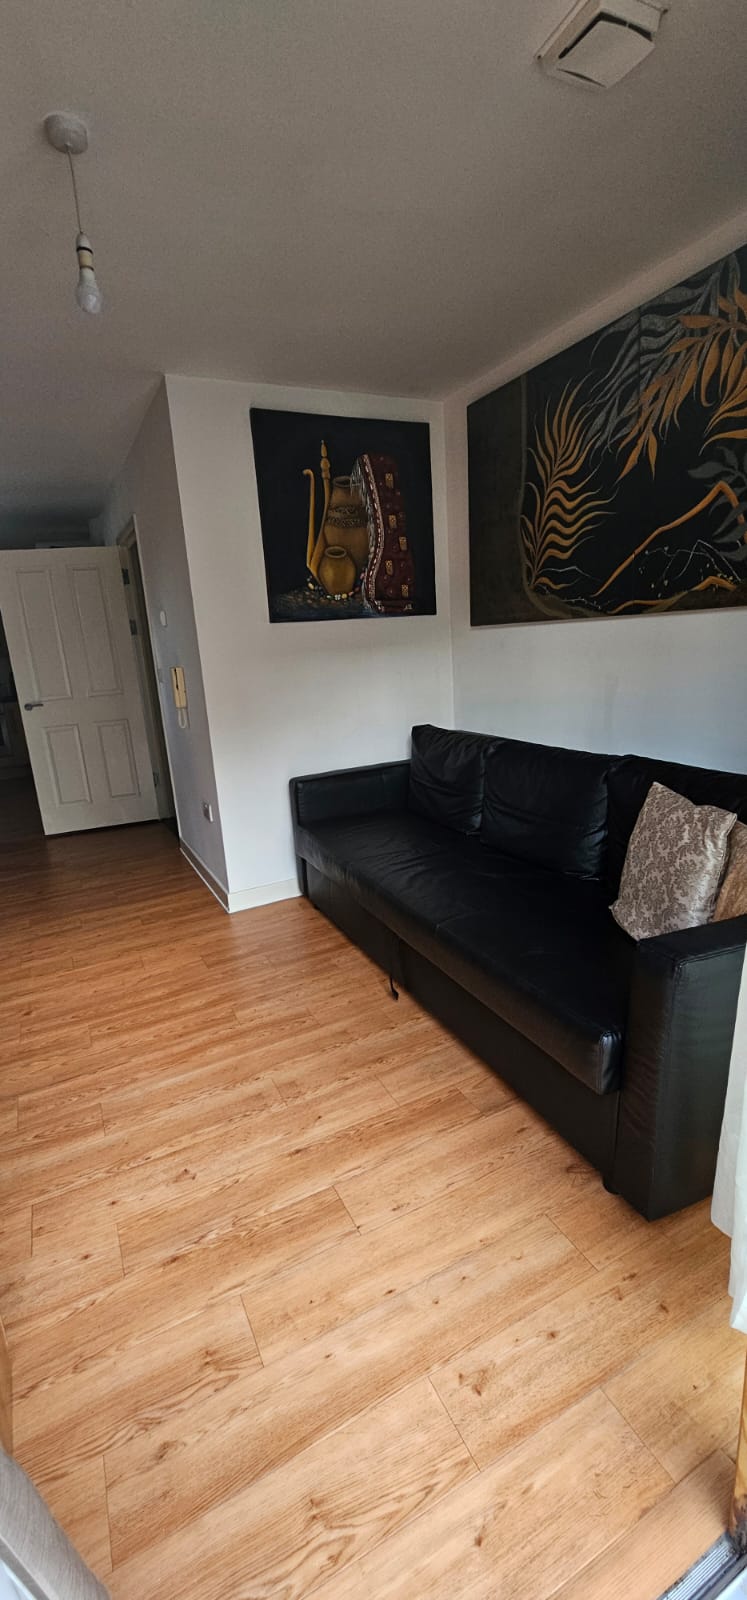 1 bed Apartment/Flat/Studio for rent in Hounslow. From PropertyLoop